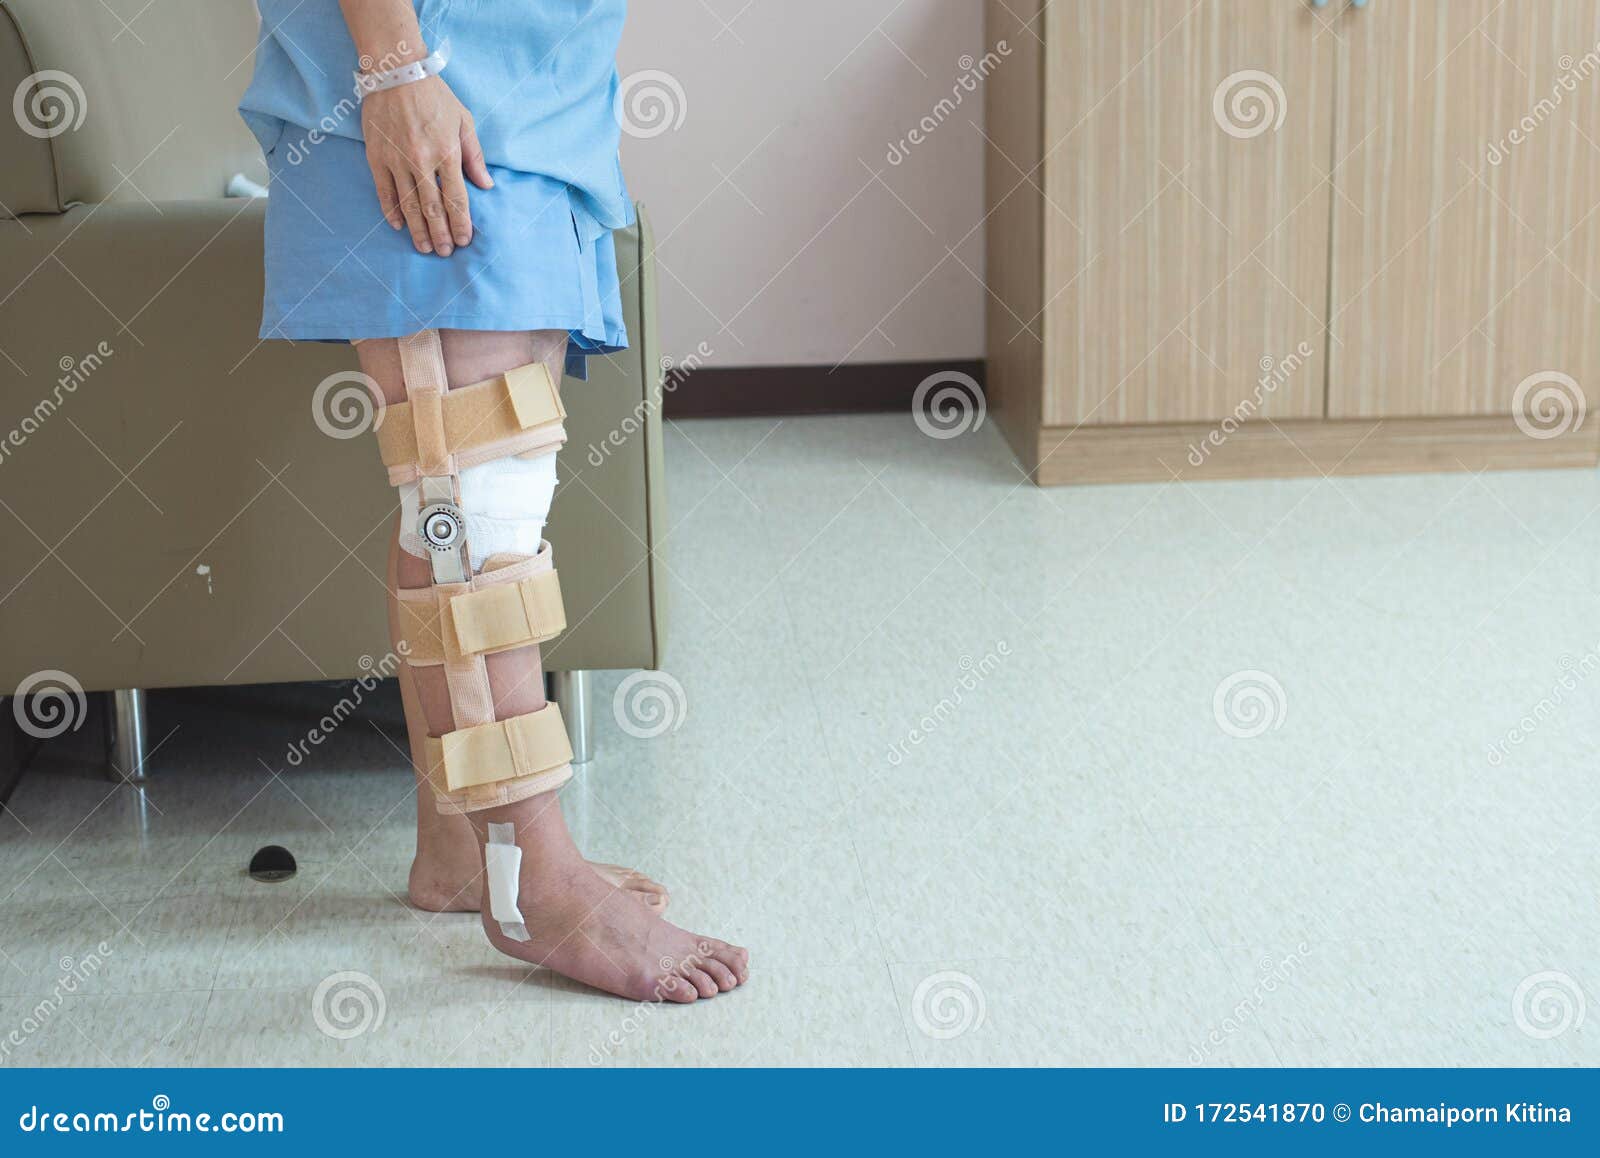 https://thumbs.dreamstime.com/z/patient-standing-support-knee-brace-plaster-pcl-ligament-surgery-orthopedic-ward-hospital-recovery-healthcare-172541870.jpg